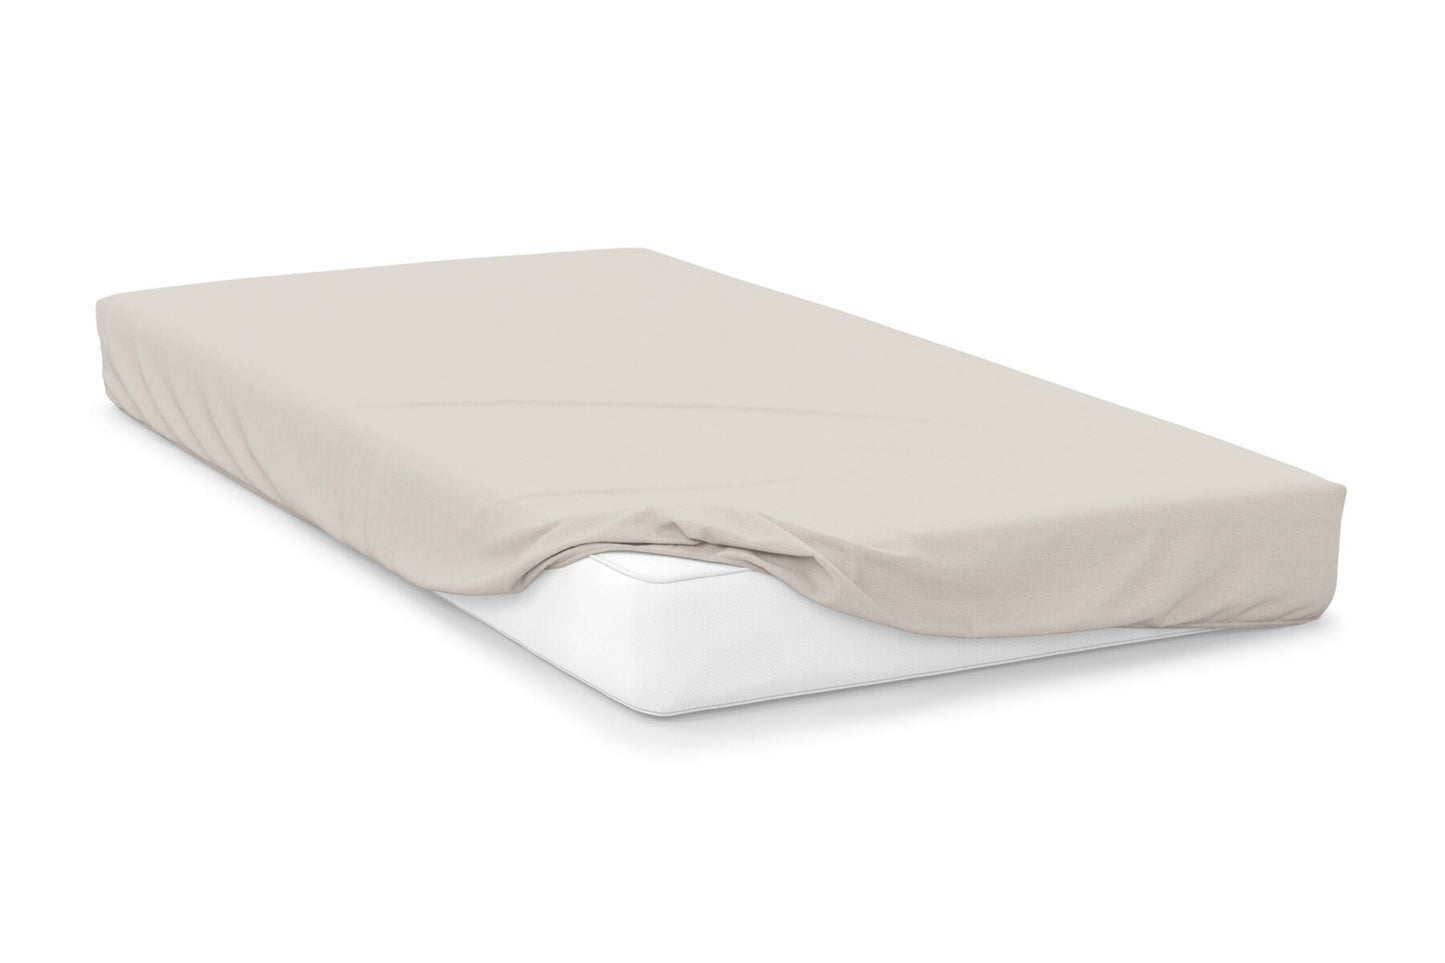 Belledorm-Fitted Sheets-Luxury Percale-200 Thread Count-Ivory